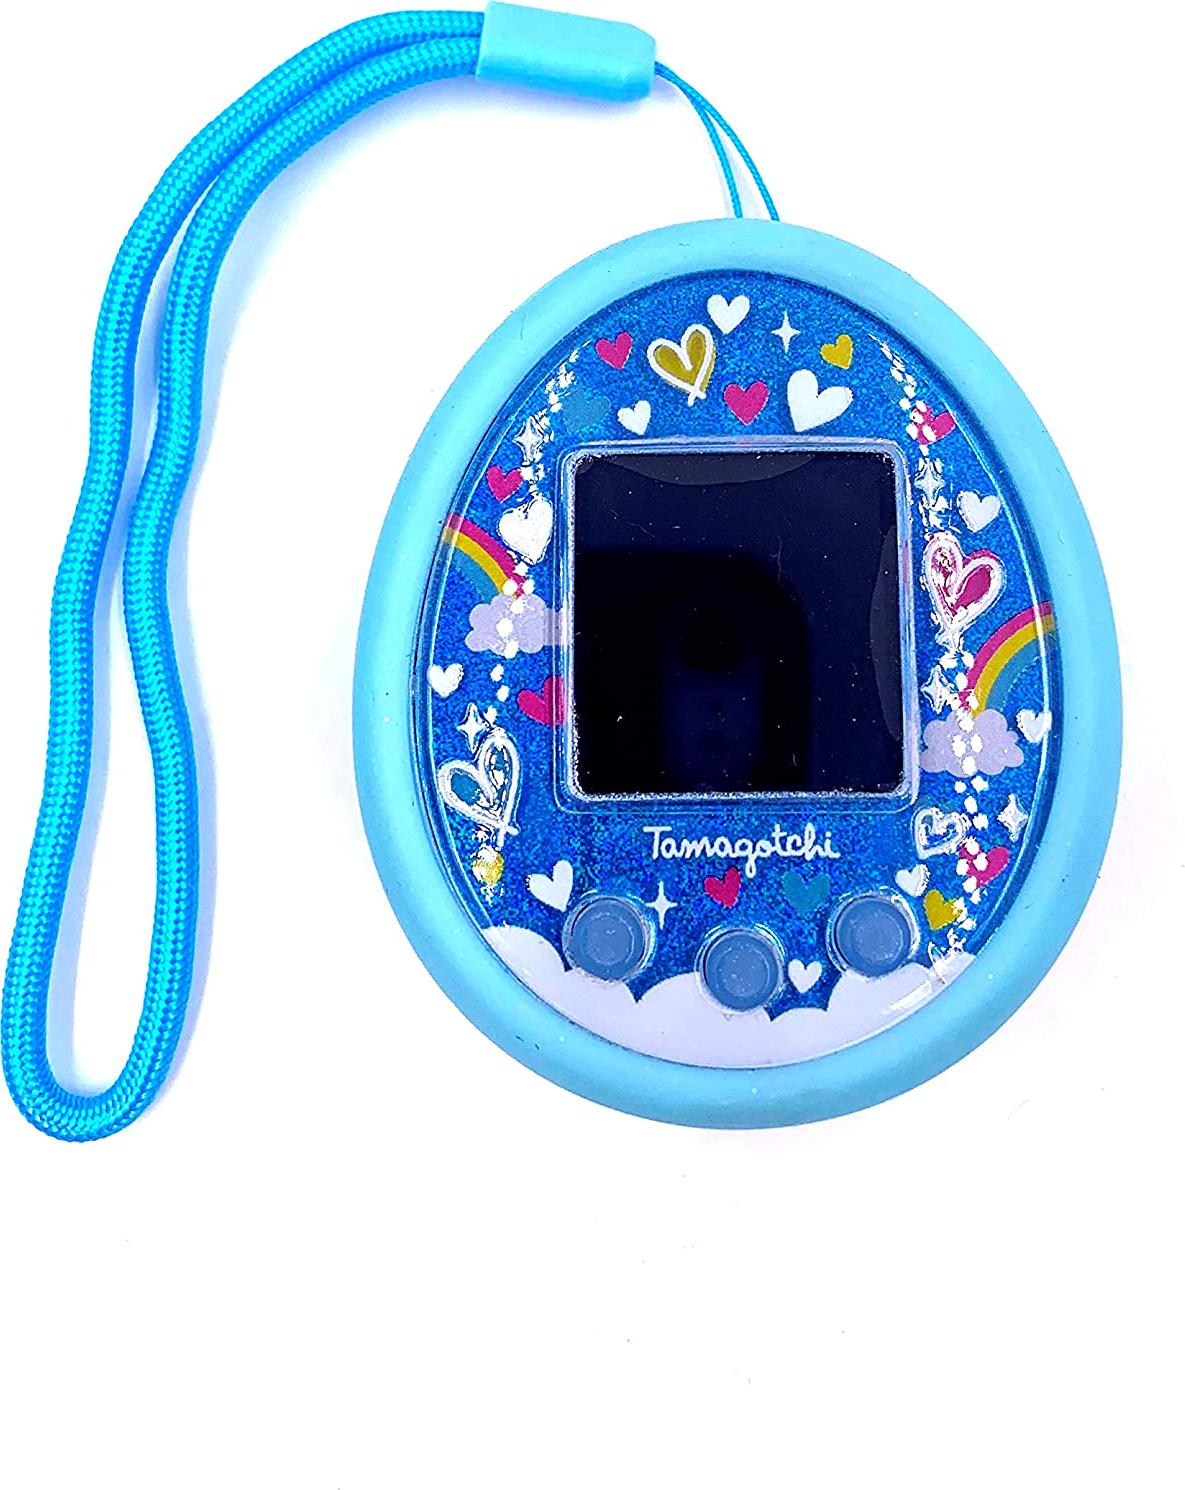 LeoTube, LeoTube Silicone Shell Cover for Tamagotchi on Interactive Pet Machine, Compatible Tamagotchi on Silicone Protective Case Skin (Blue)